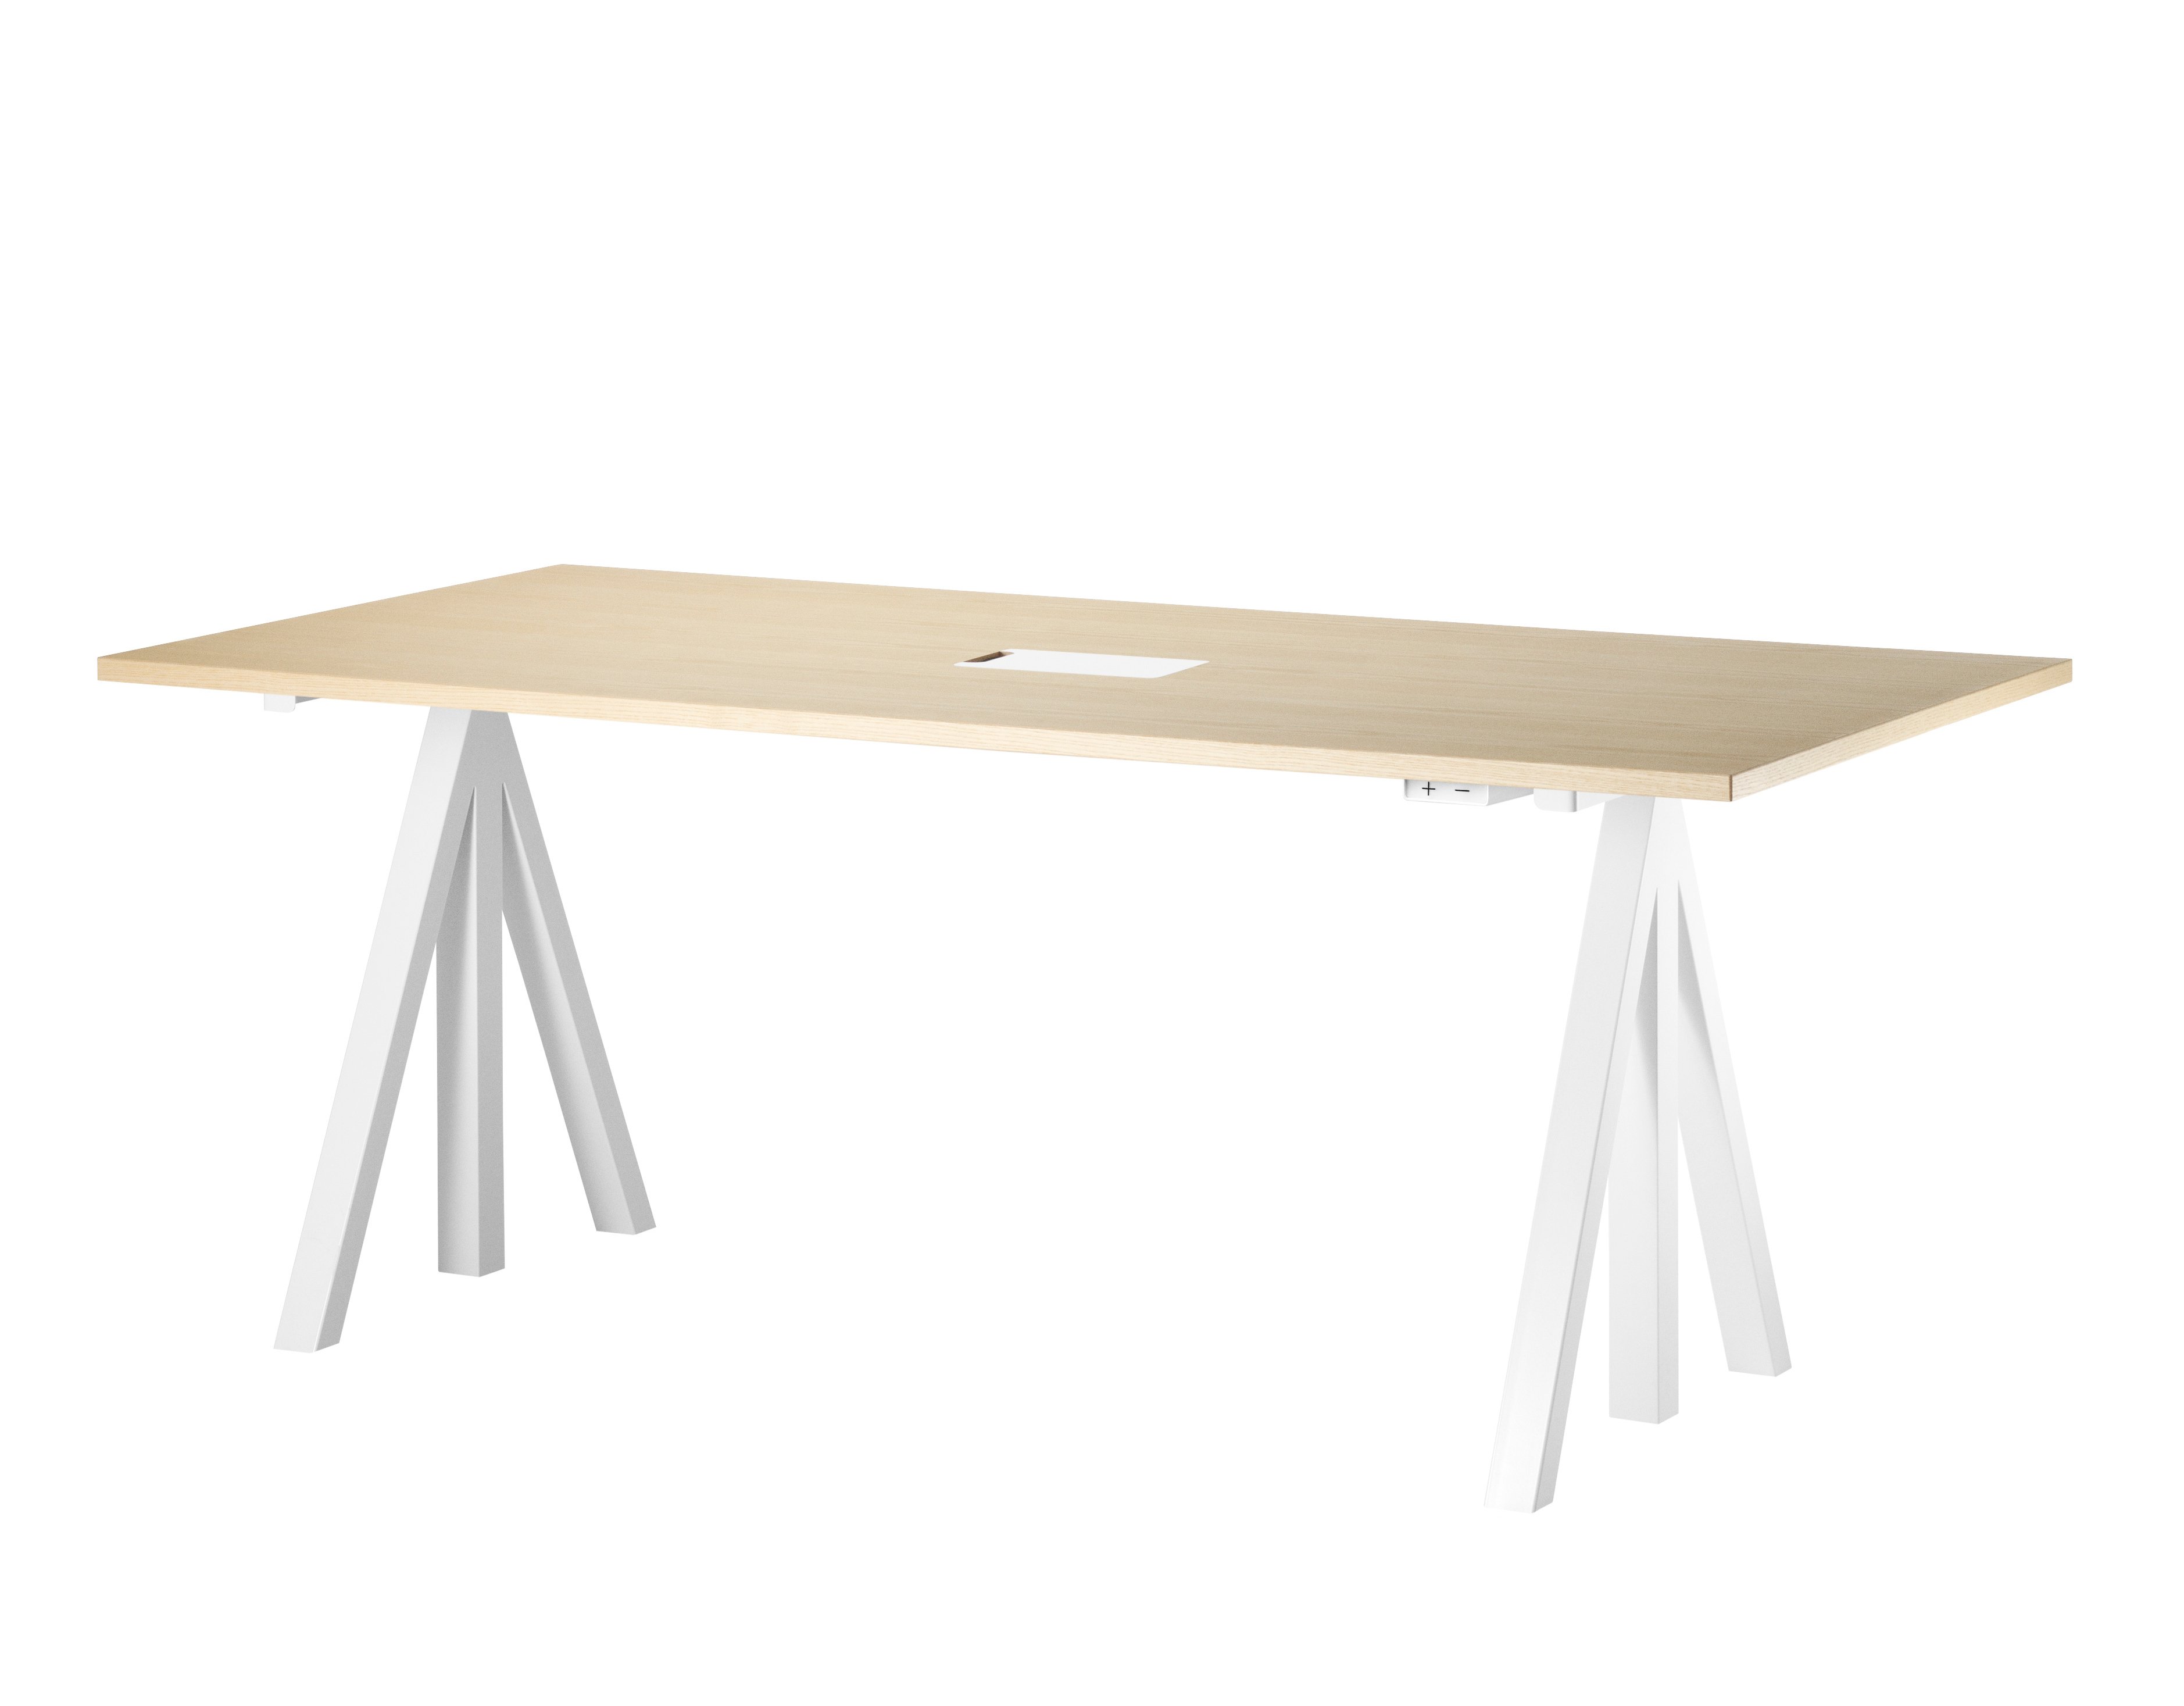 height-adjustable meeting table, ash 180x90 cm